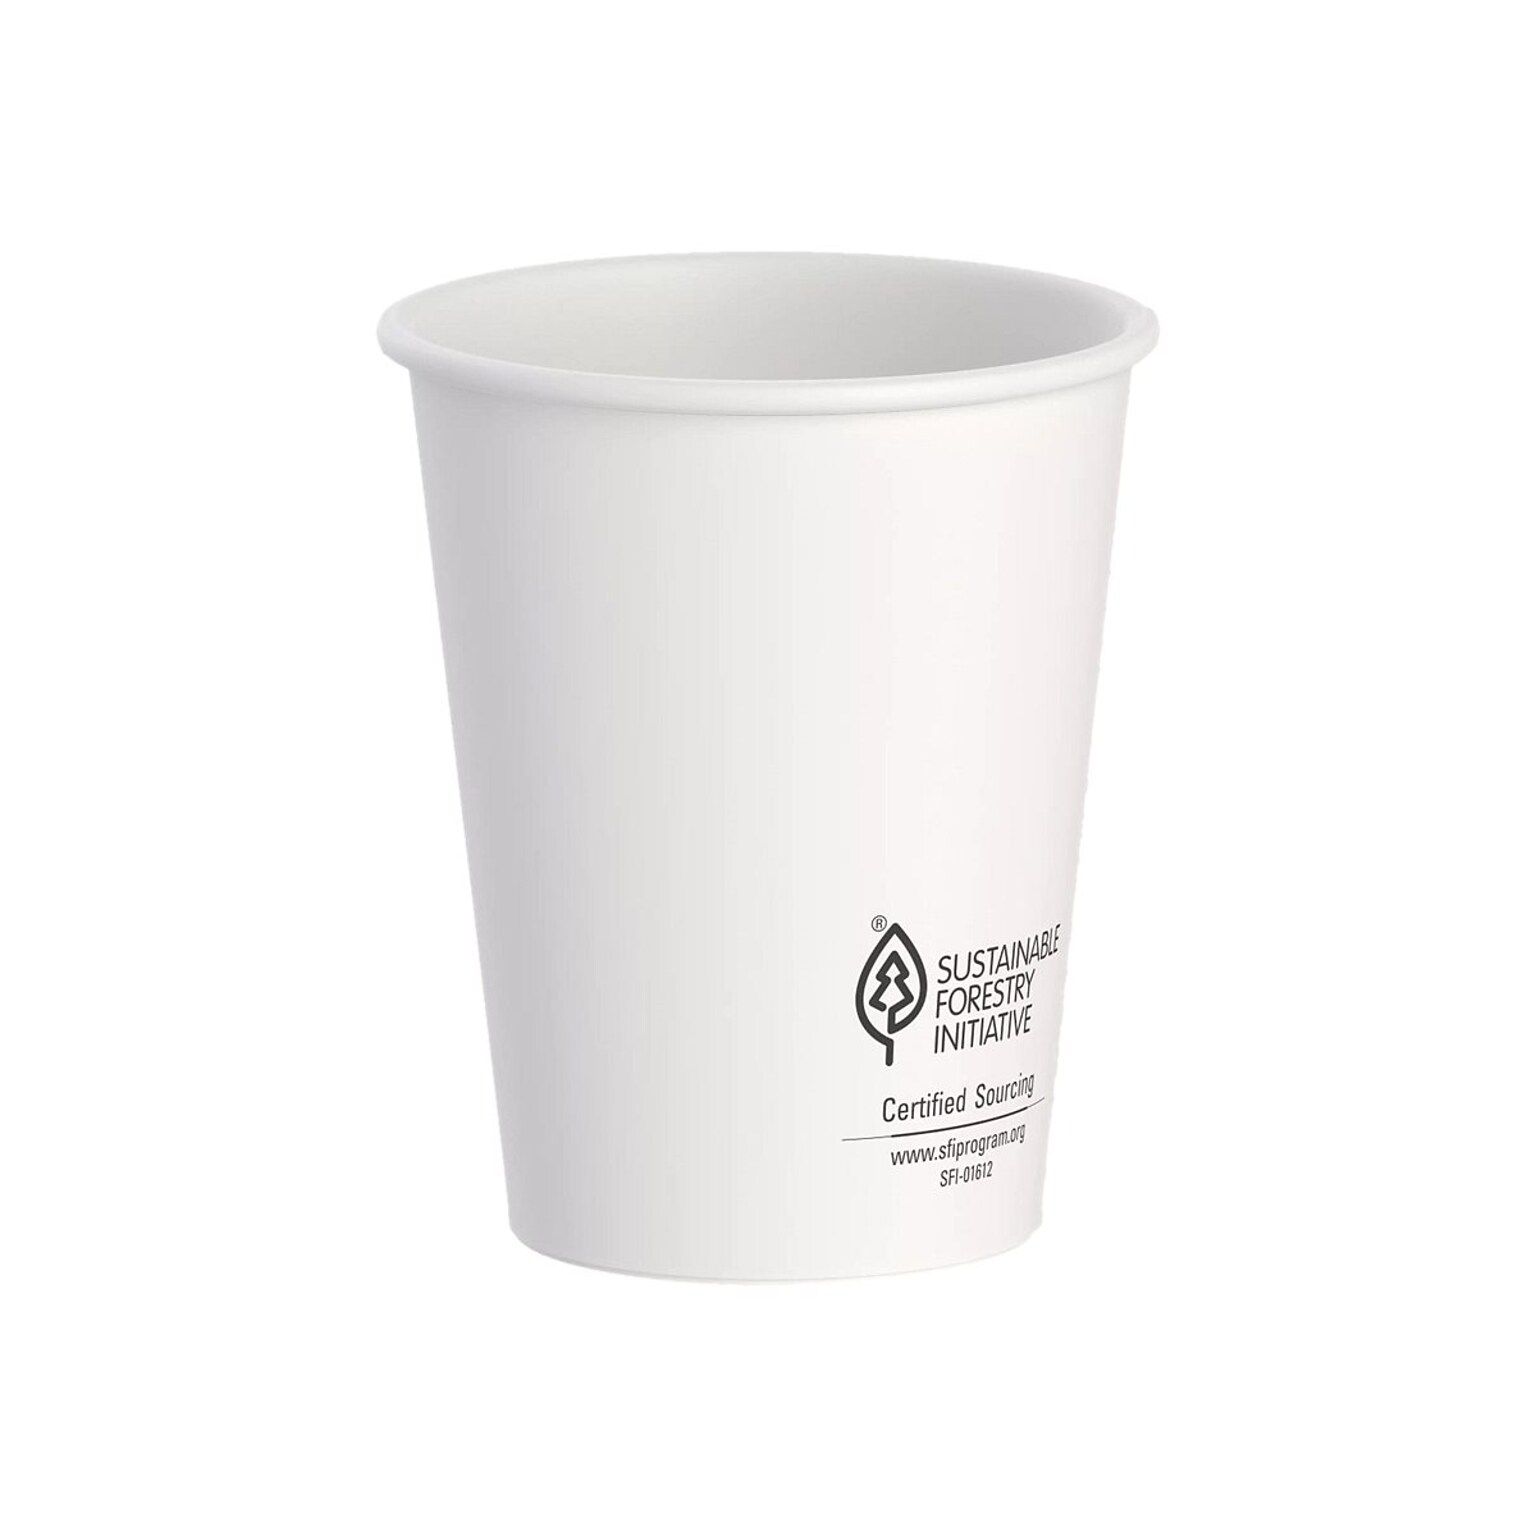 Dart ThermoGuard Paper Hot Cup, 8 Oz., White, 40/Pack (DWTG8W-40)